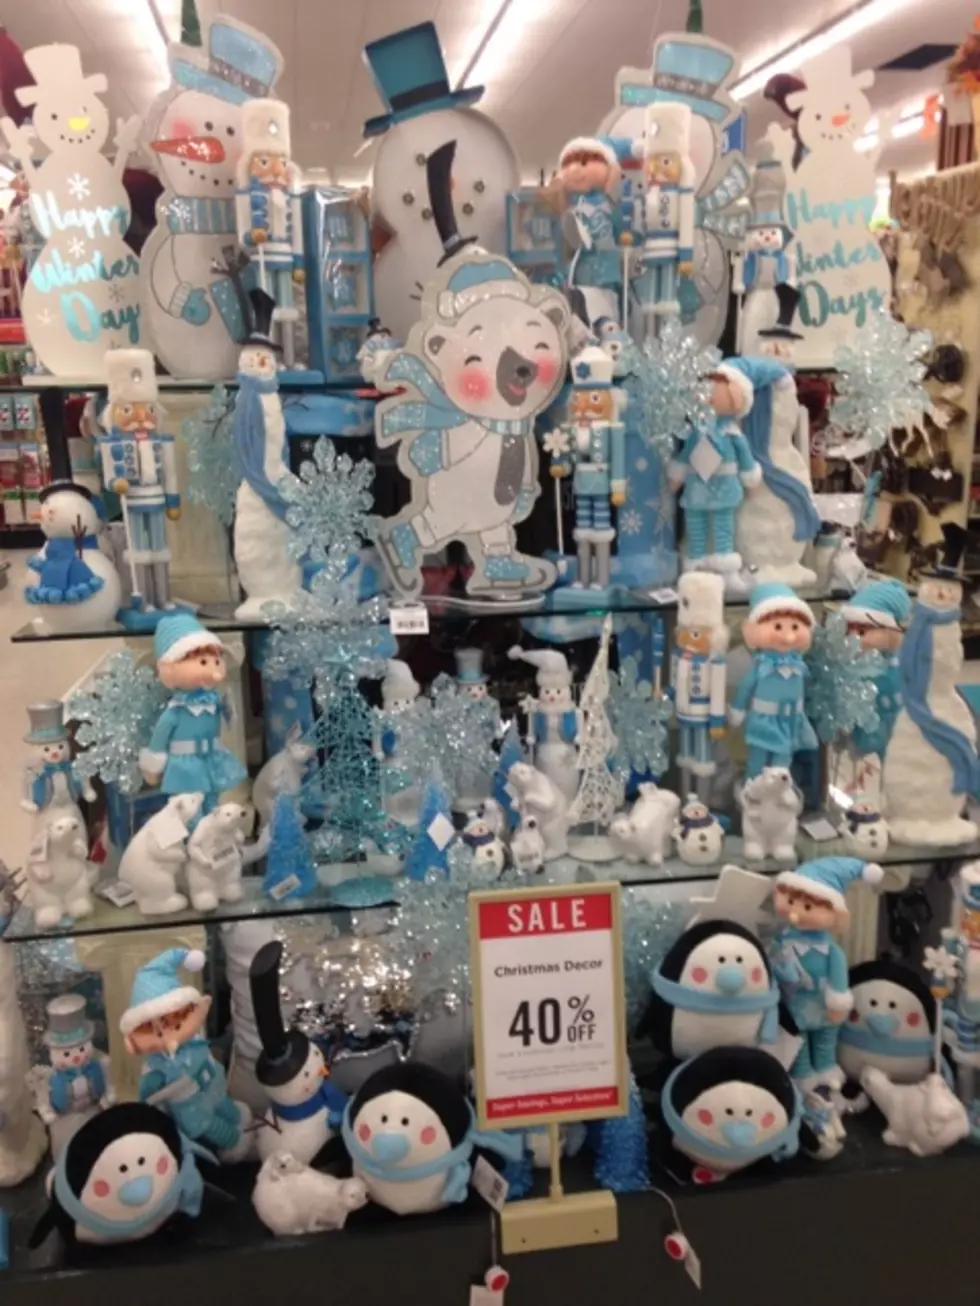 Forget Halloween, This NJ Store Is Already Selling Christmas Decorations